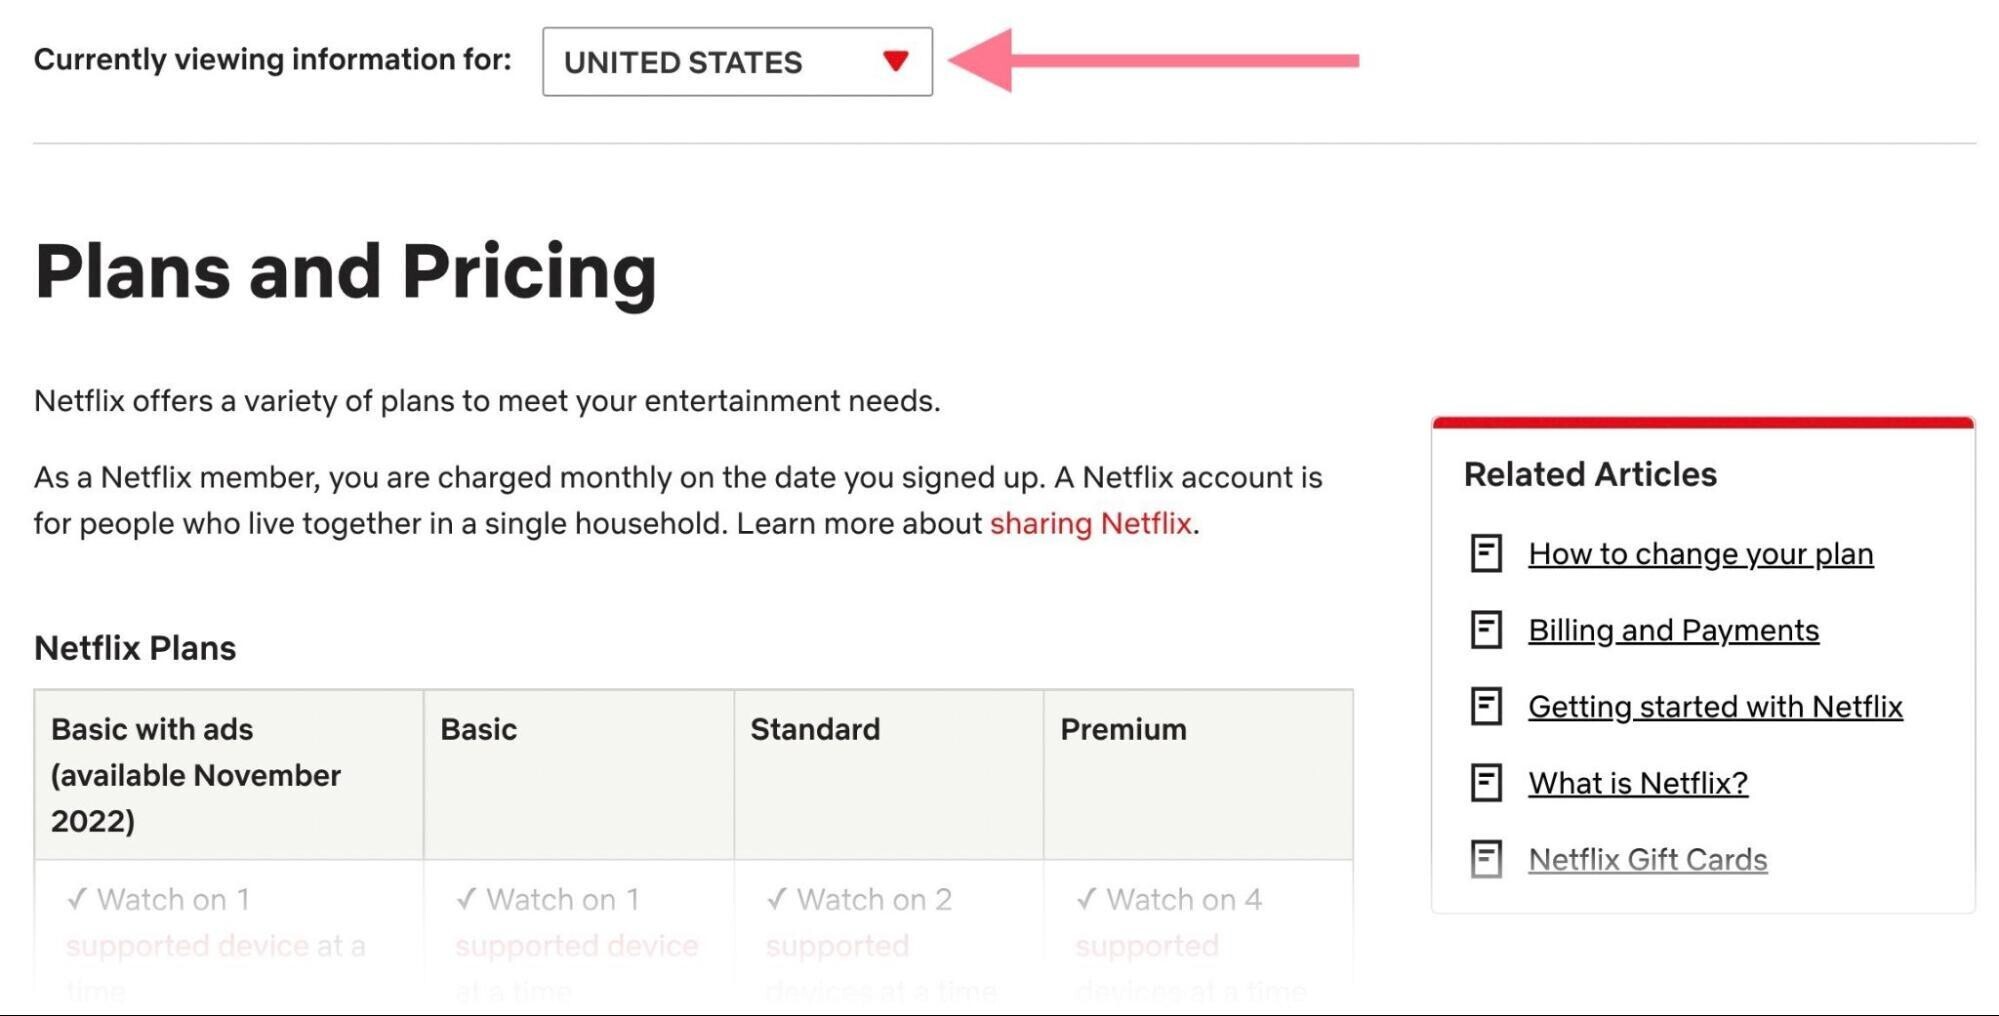 Netflix question plans and pricing